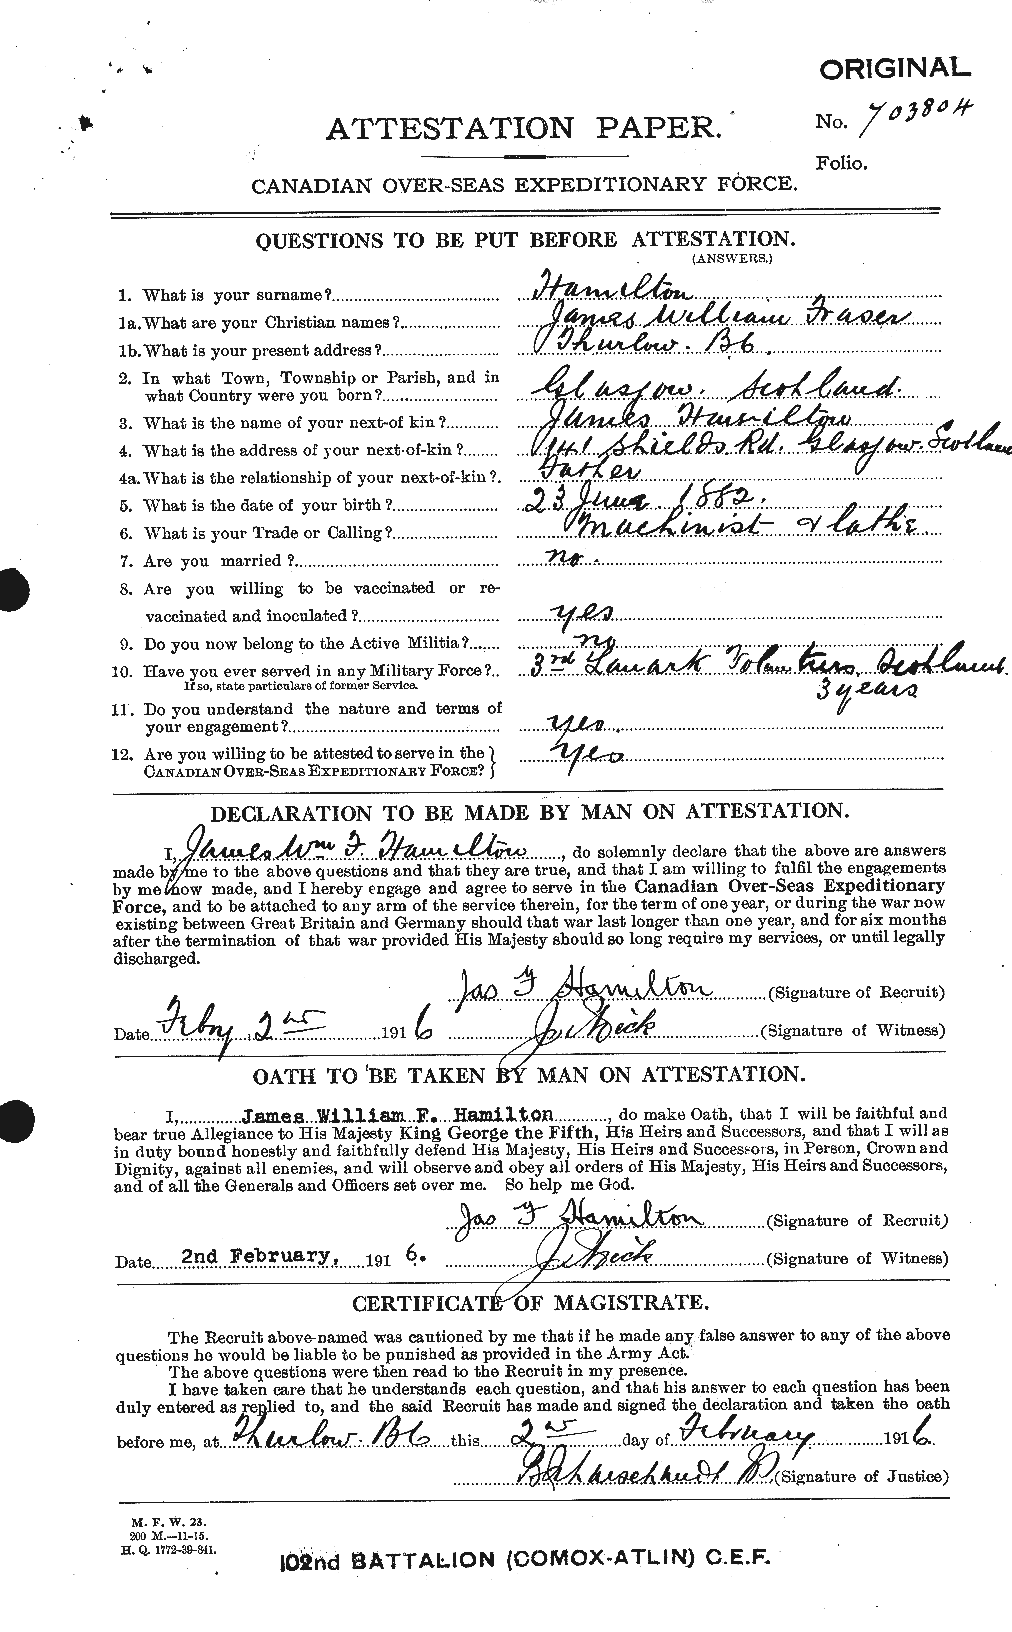 Personnel Records of the First World War - CEF 373013a